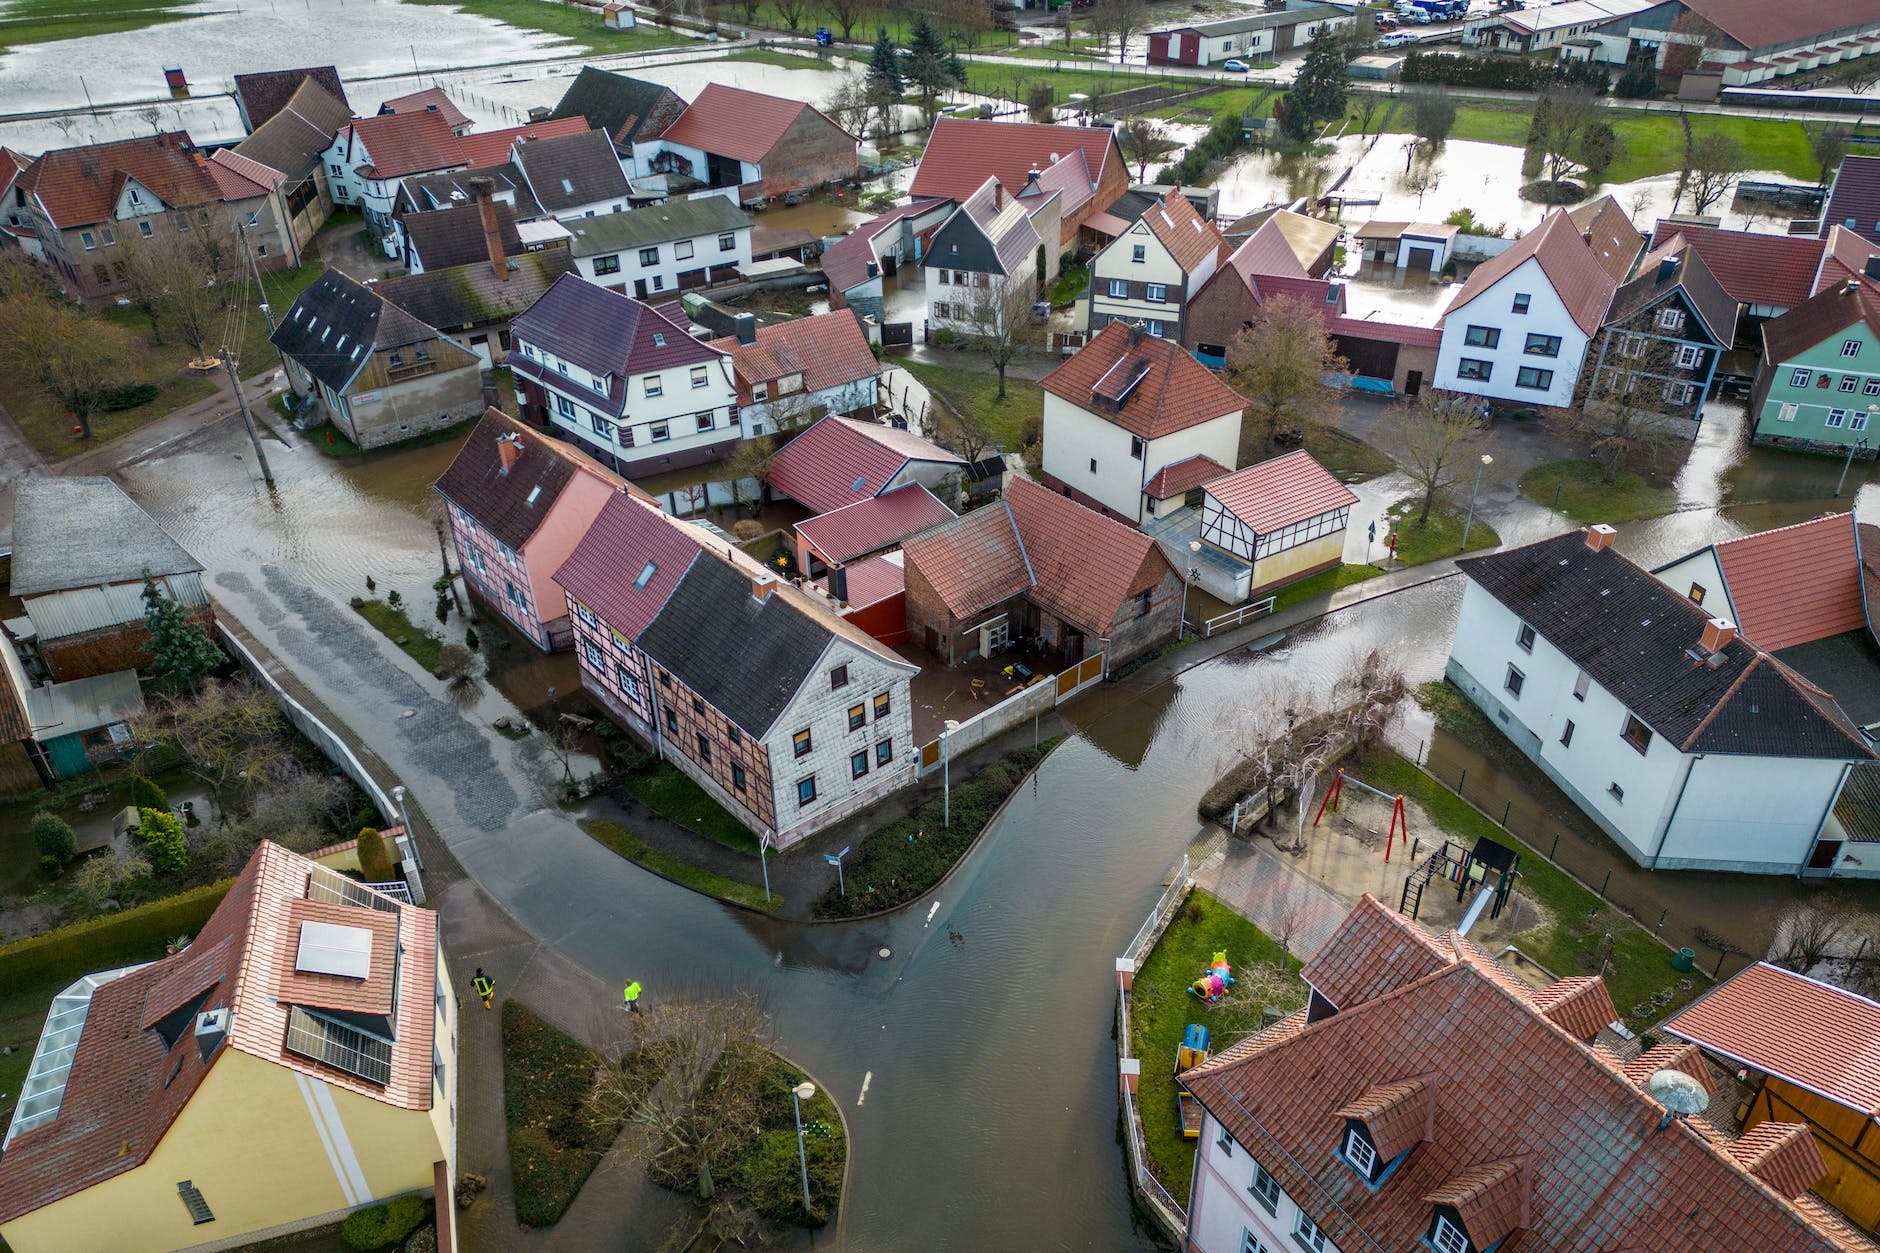 Thuringia, Windehausen: Several streets in Heringen-Windehausen are also under water on Boxing Day.